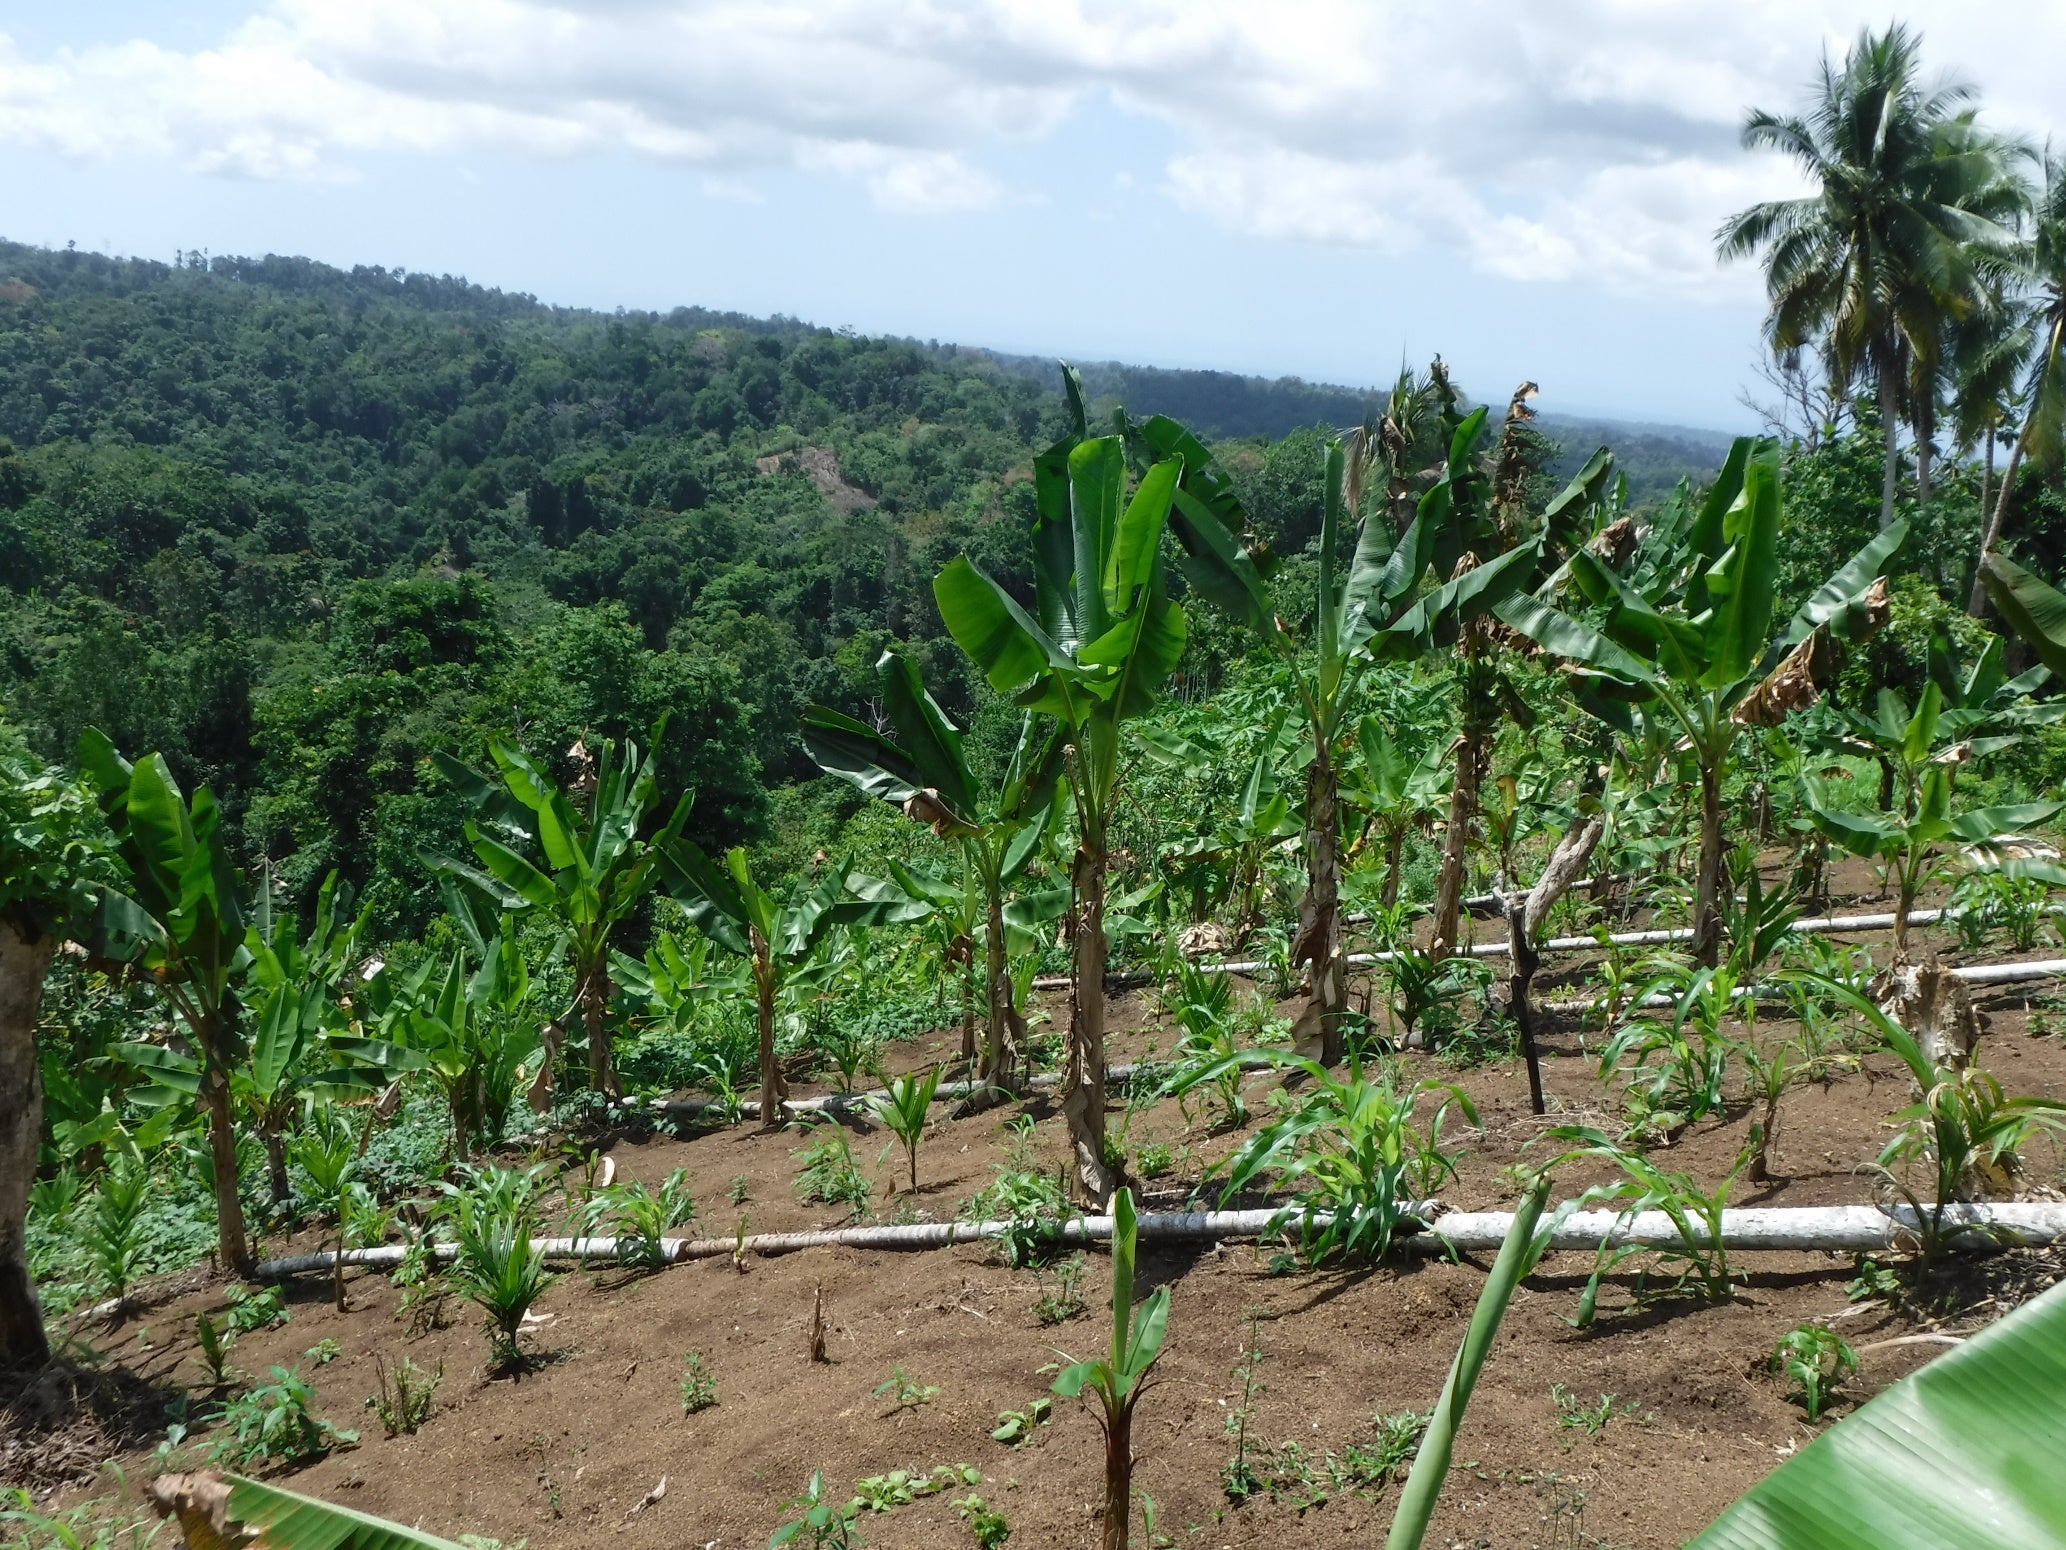 A food garden in Ohu, Papua New Guinea. The vast majority of people in Papua New Guinea rely on their garden for their daily food and income. Credit: Mirjam Hazenbosch.